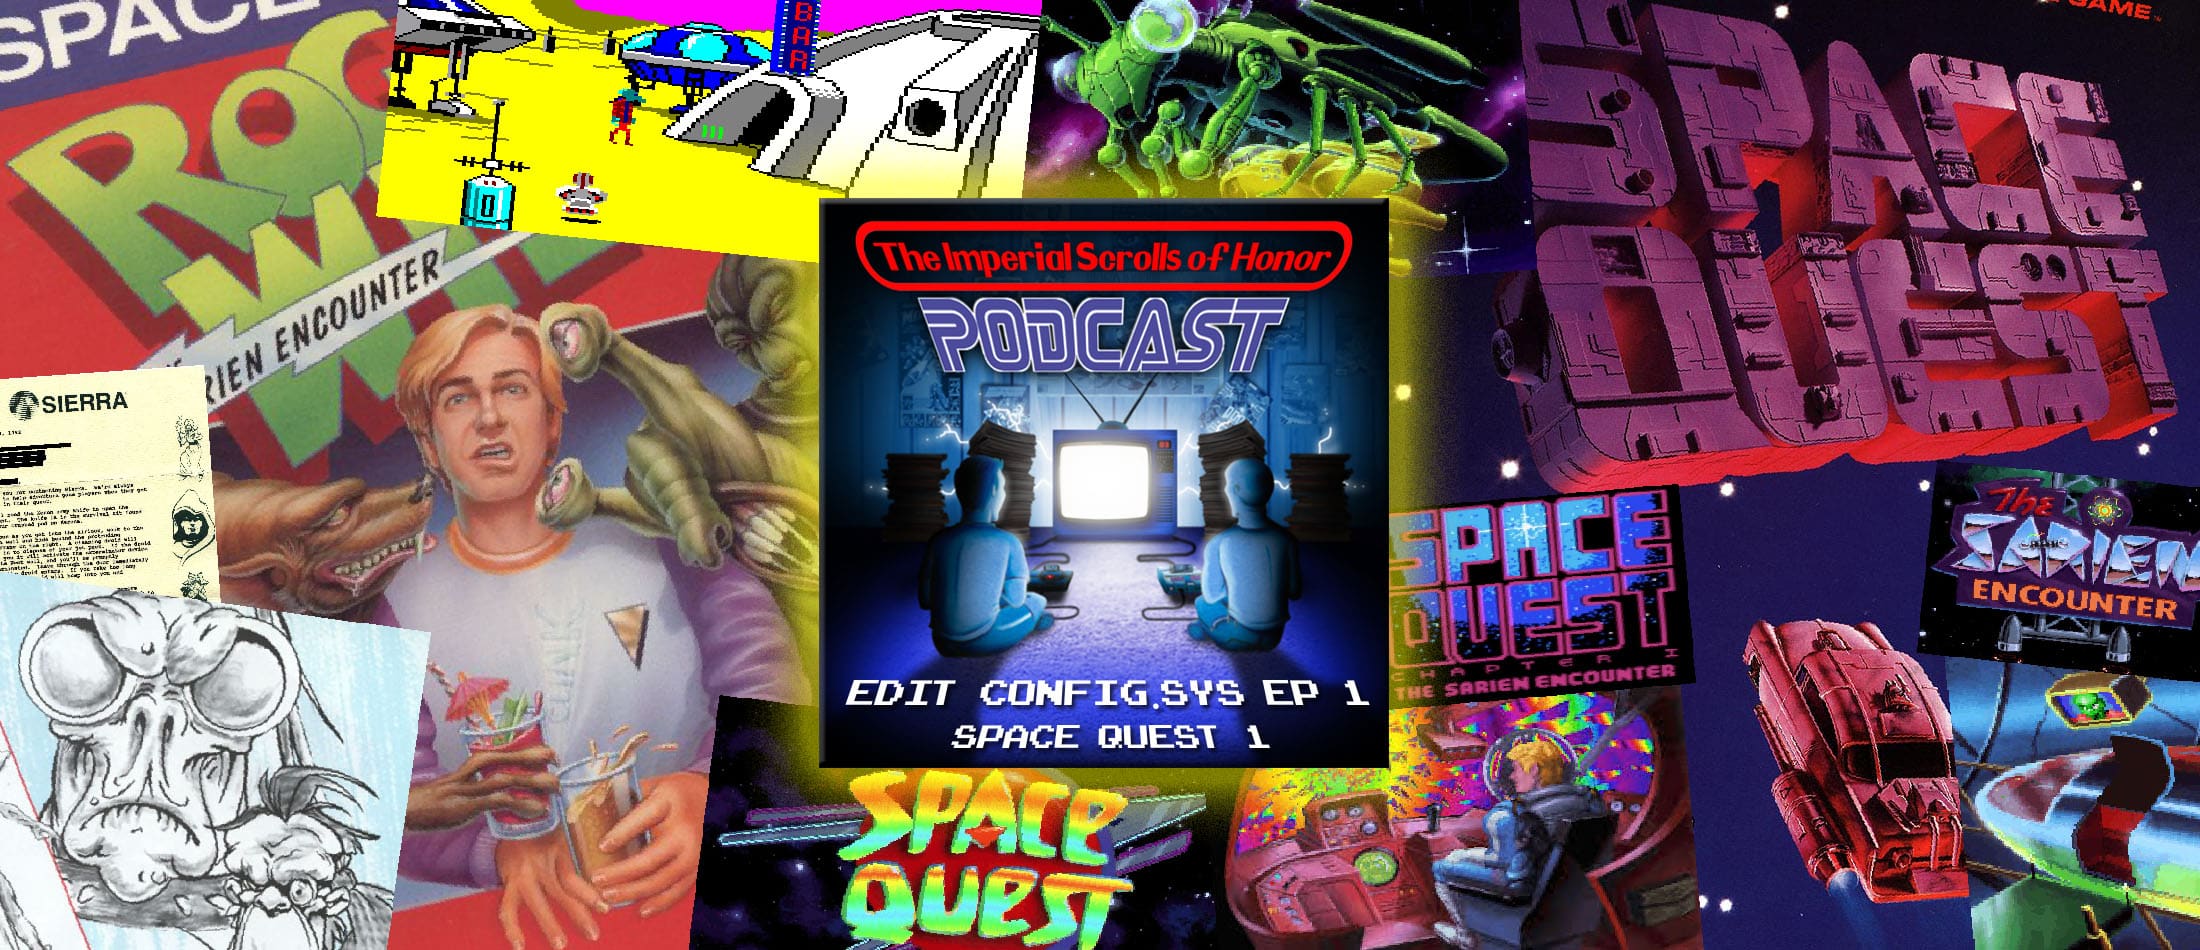 The Imperial Scrolls of Honor Podcast - EDIT CONFIG.SYS QUEST – Space Quest I Ep 1